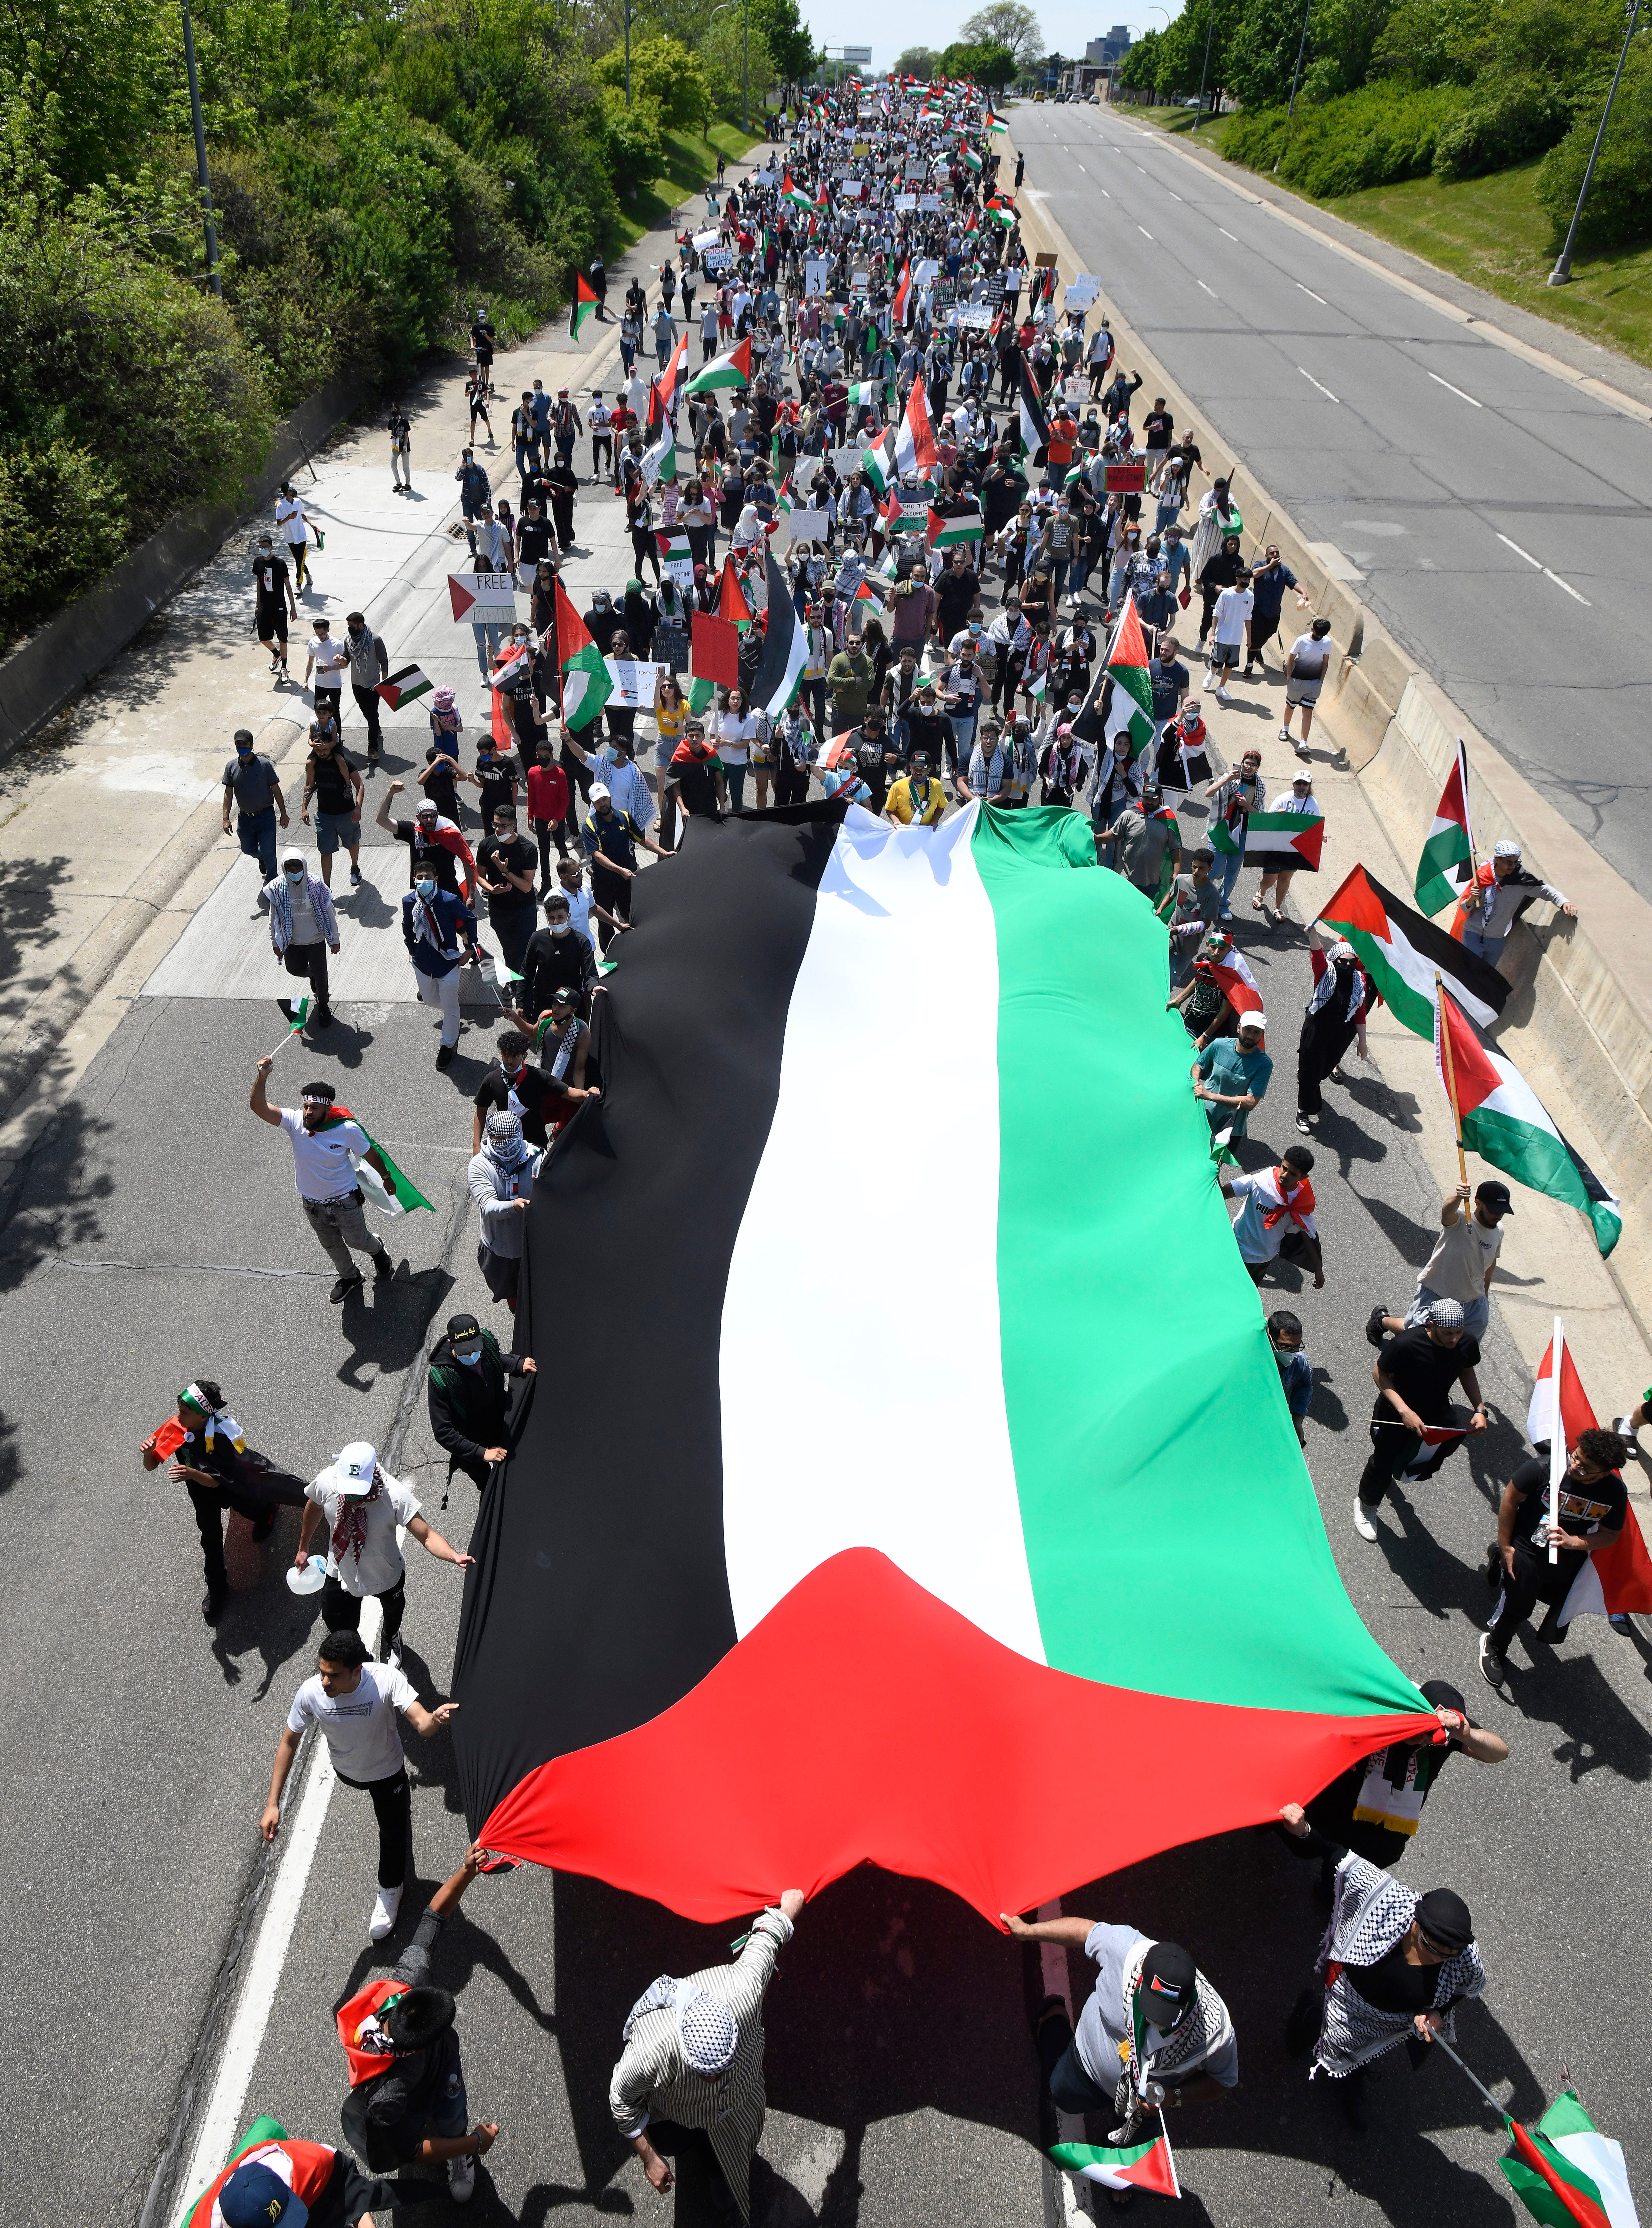 A huge Palestinian flag followed by thousands of Palestinian supporters march down eastbound Michigan Avenue during a Palestinian protest and march, at the same time President Joe Biden is visiting in another part of Dearborn, Michigan on May 18, 2021.